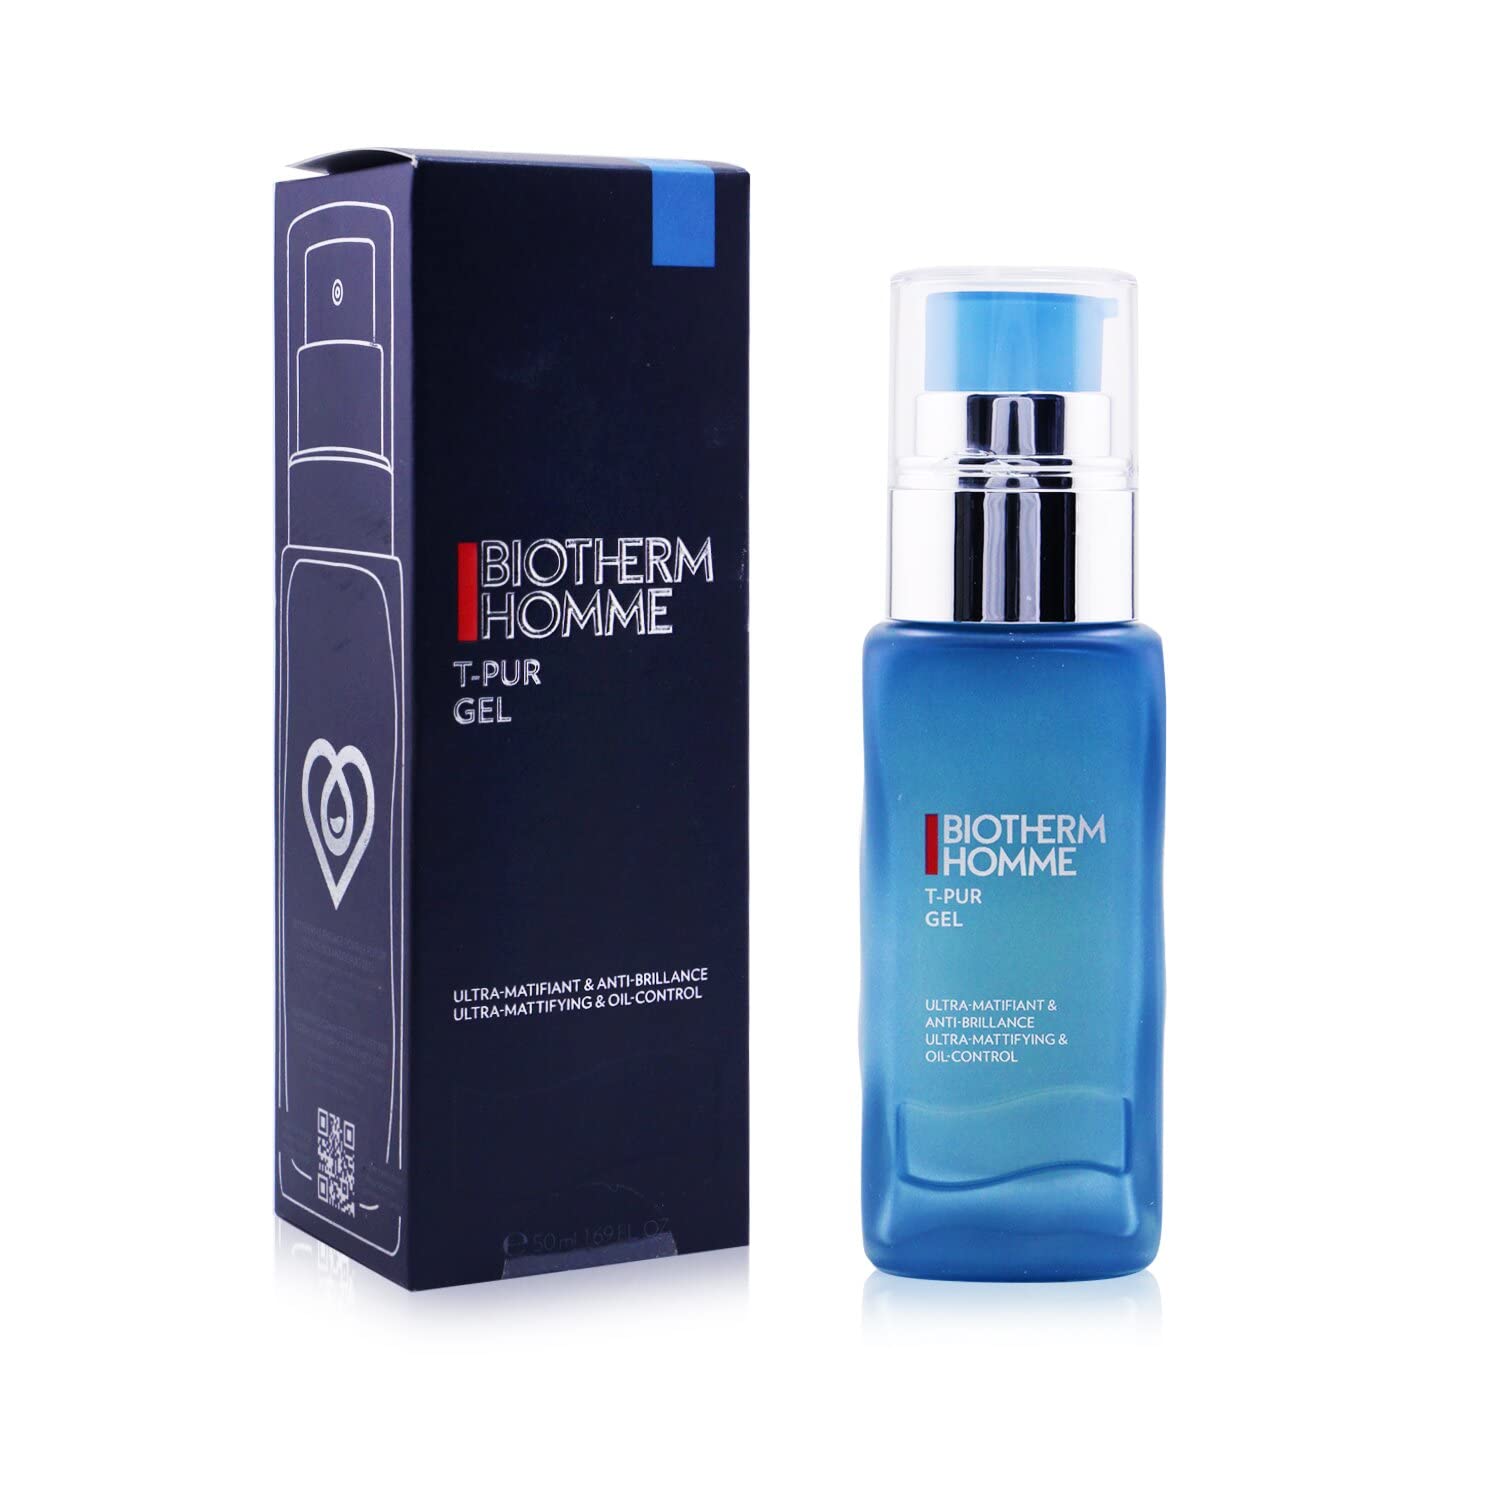 Biotherm Homme T-Pur Ultra-Mattifying & Oil-Control Gel for Men, 1.7 O -  Fulfillment Center